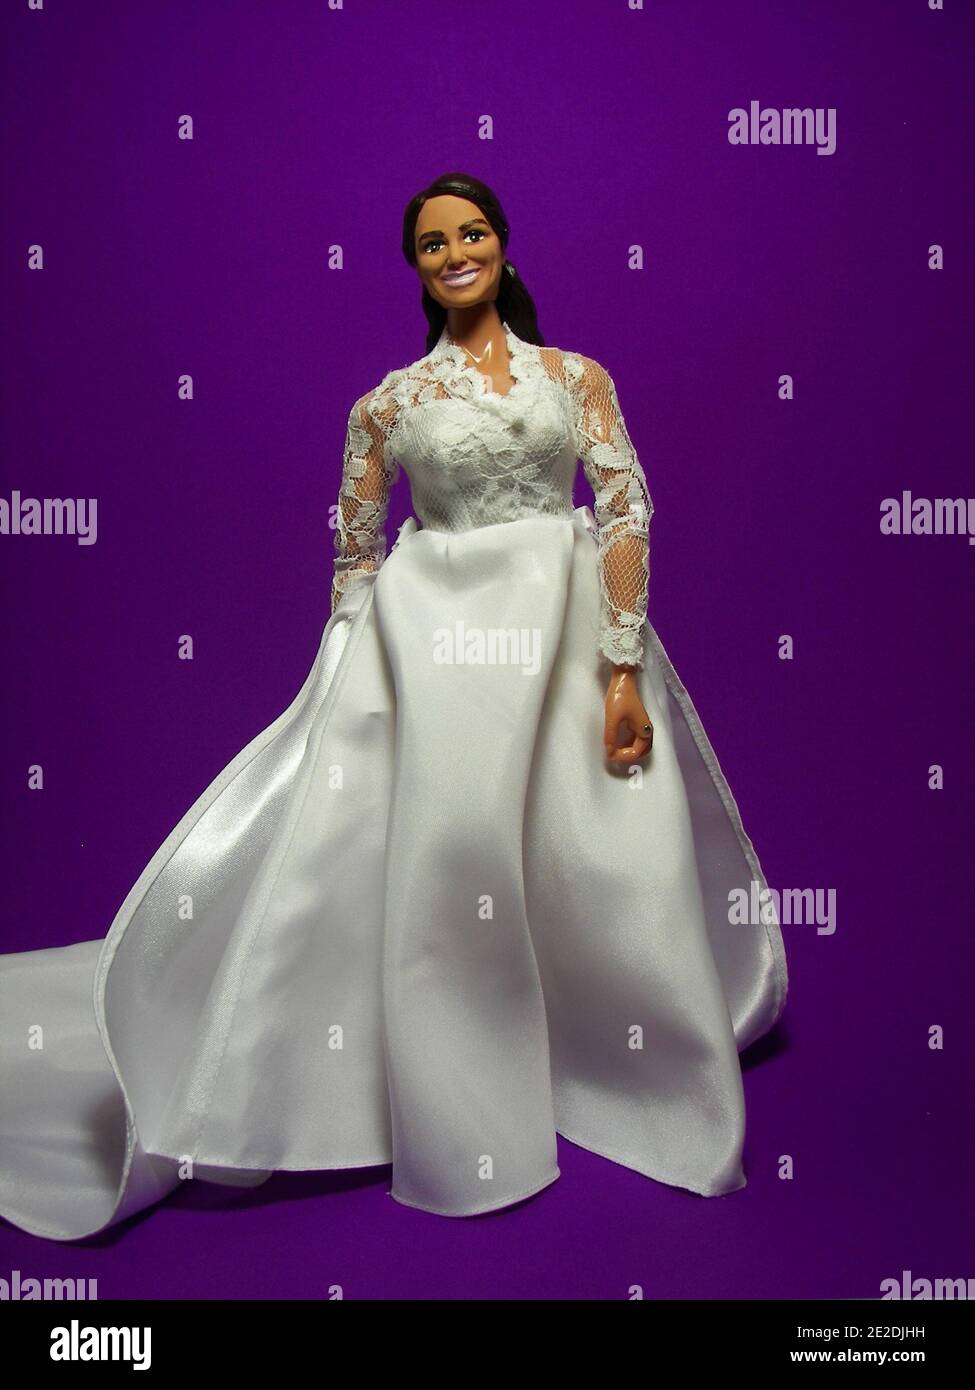 The 'Kate' doll is one of the latest creations by US company Hero Builders created in the wake of the royal wedding. She is dressed in a replica of the Sarah Burton Alexander McQueen dress worn at the royal wedding. The dress includes the lacework bodice and a train. The doll retails for 189.95 $. Photo courtesy Herobuilders.com/ABACAPRESS.COM Stock Photo